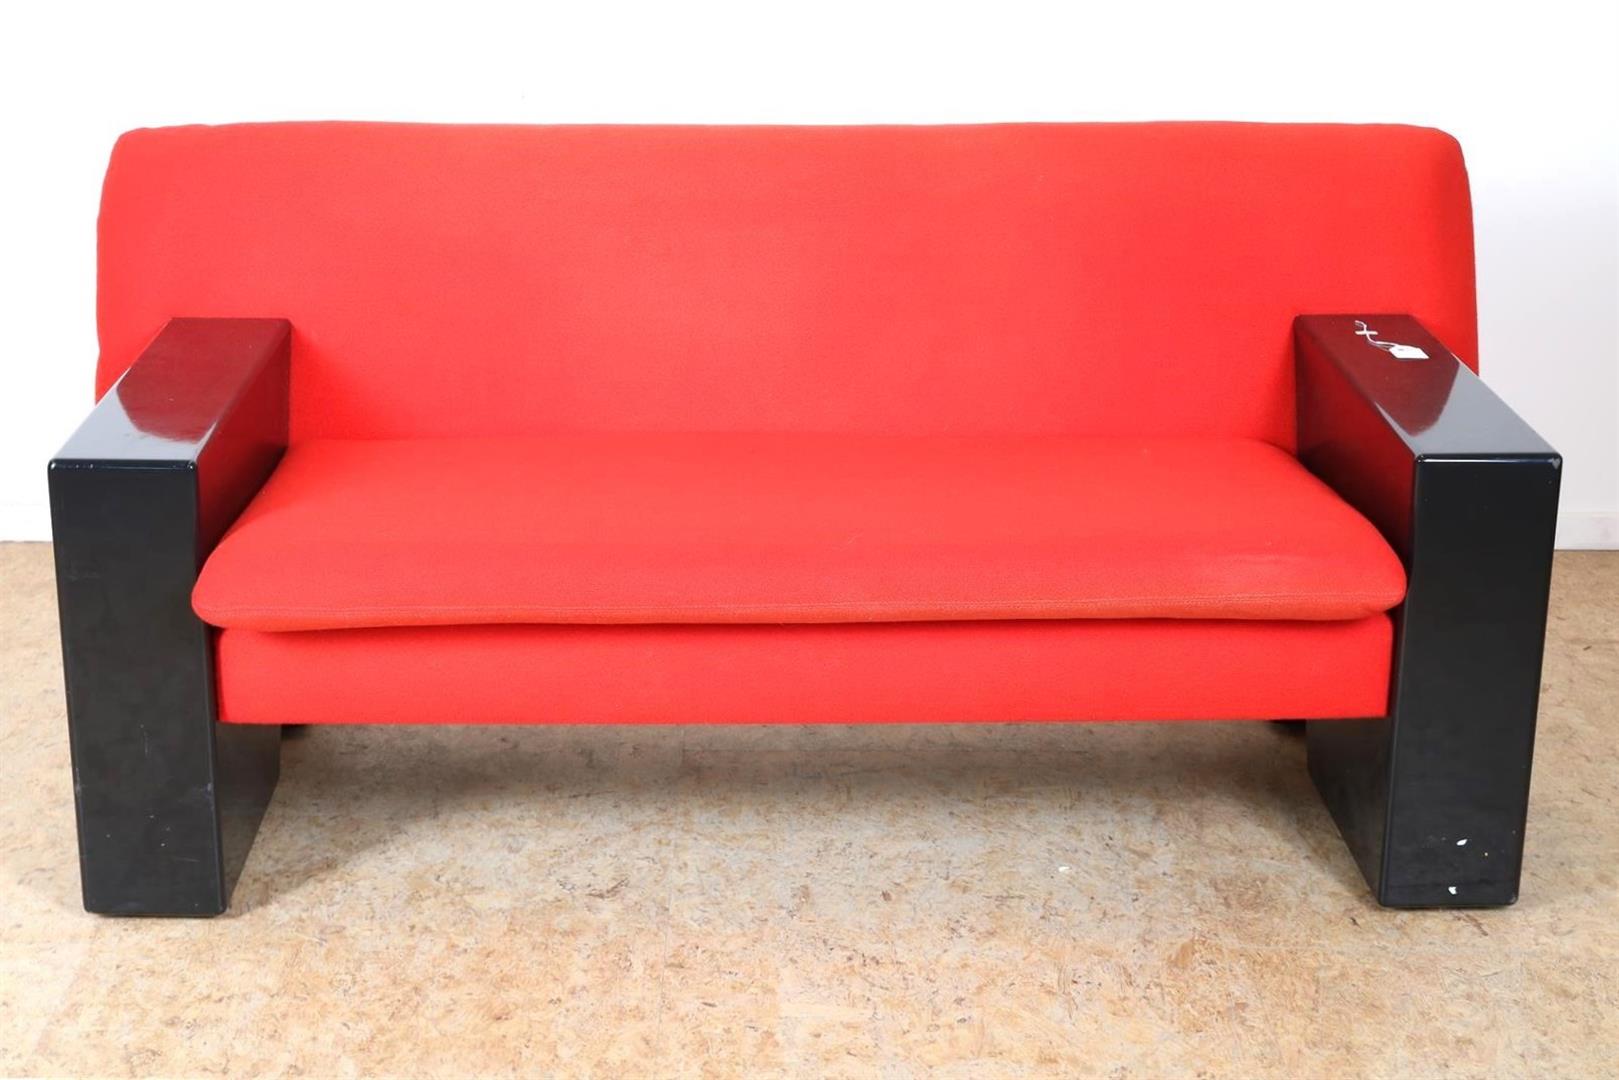 Two-seater sofa with red fabric upholstery and black wooden base, model “Sandwich” (model 750),